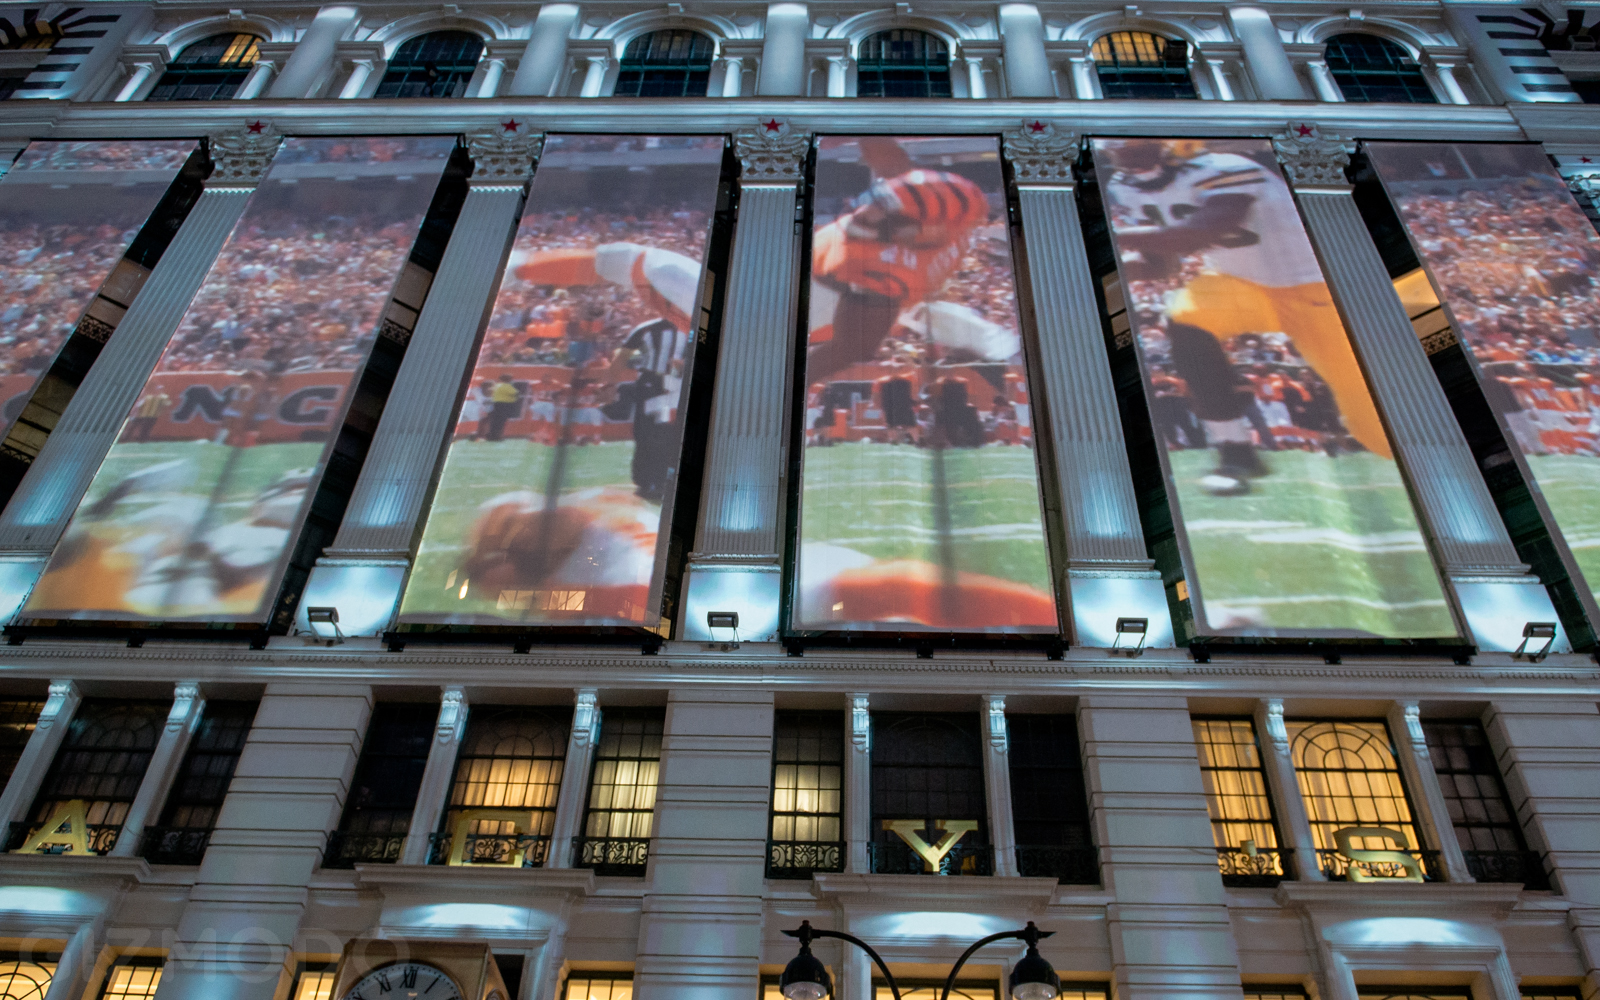 How The Super Bowl Turned The NYC Macy’s Building Into A Massive Screen